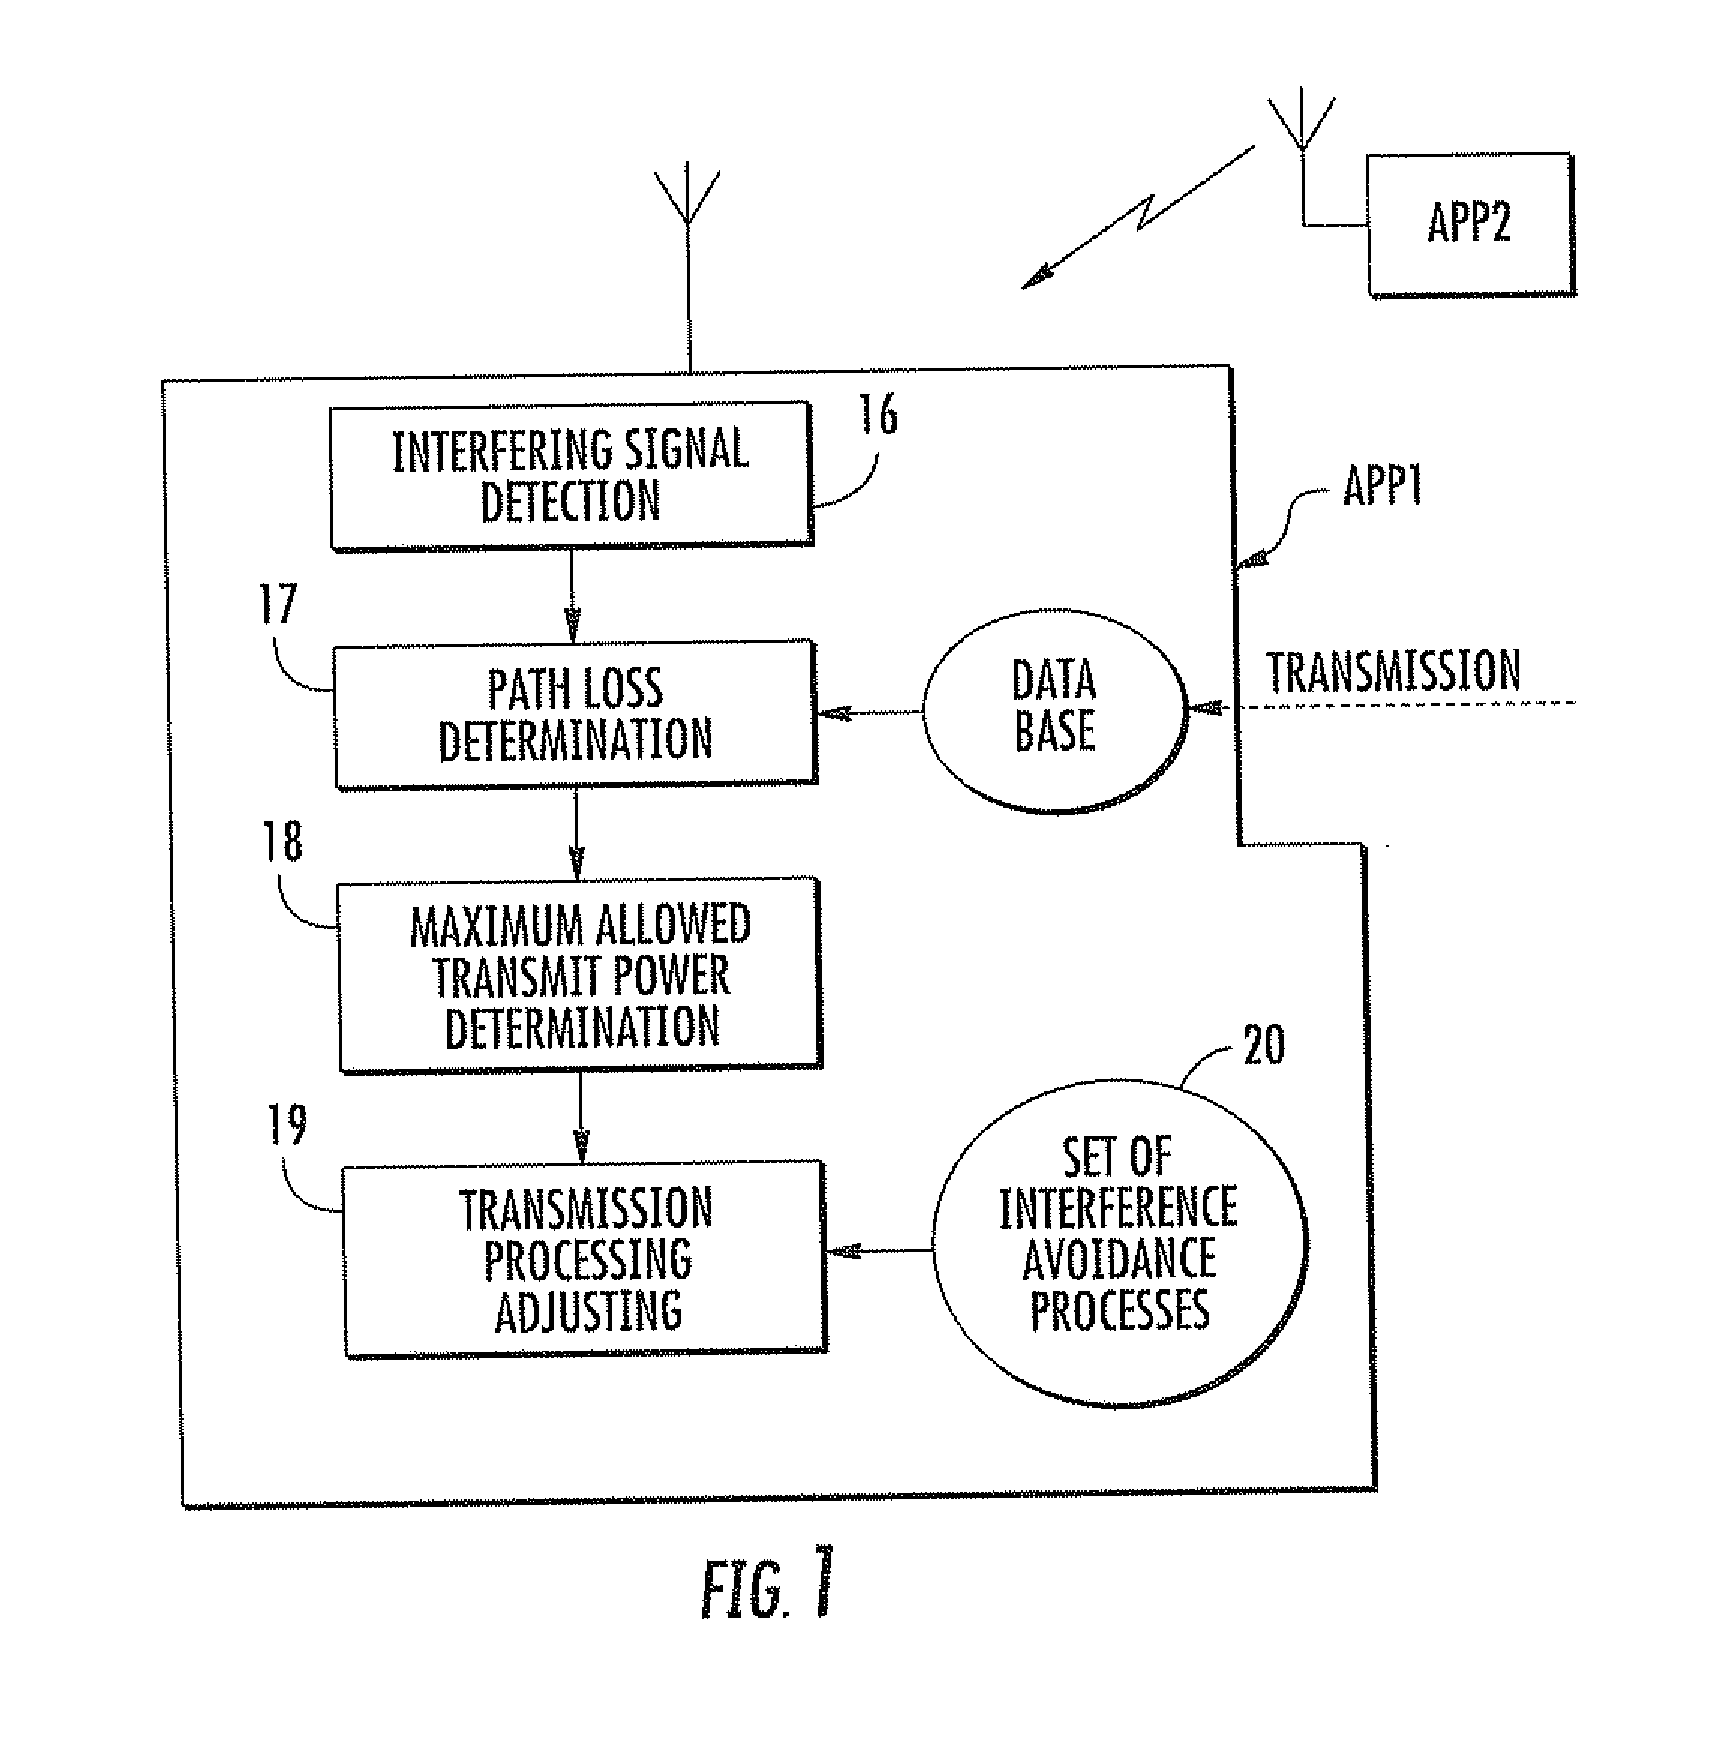 Method and device for managing the operation of an apparatus, for example an mb-ofdm apparatus, in presence of an eventual interfering signal